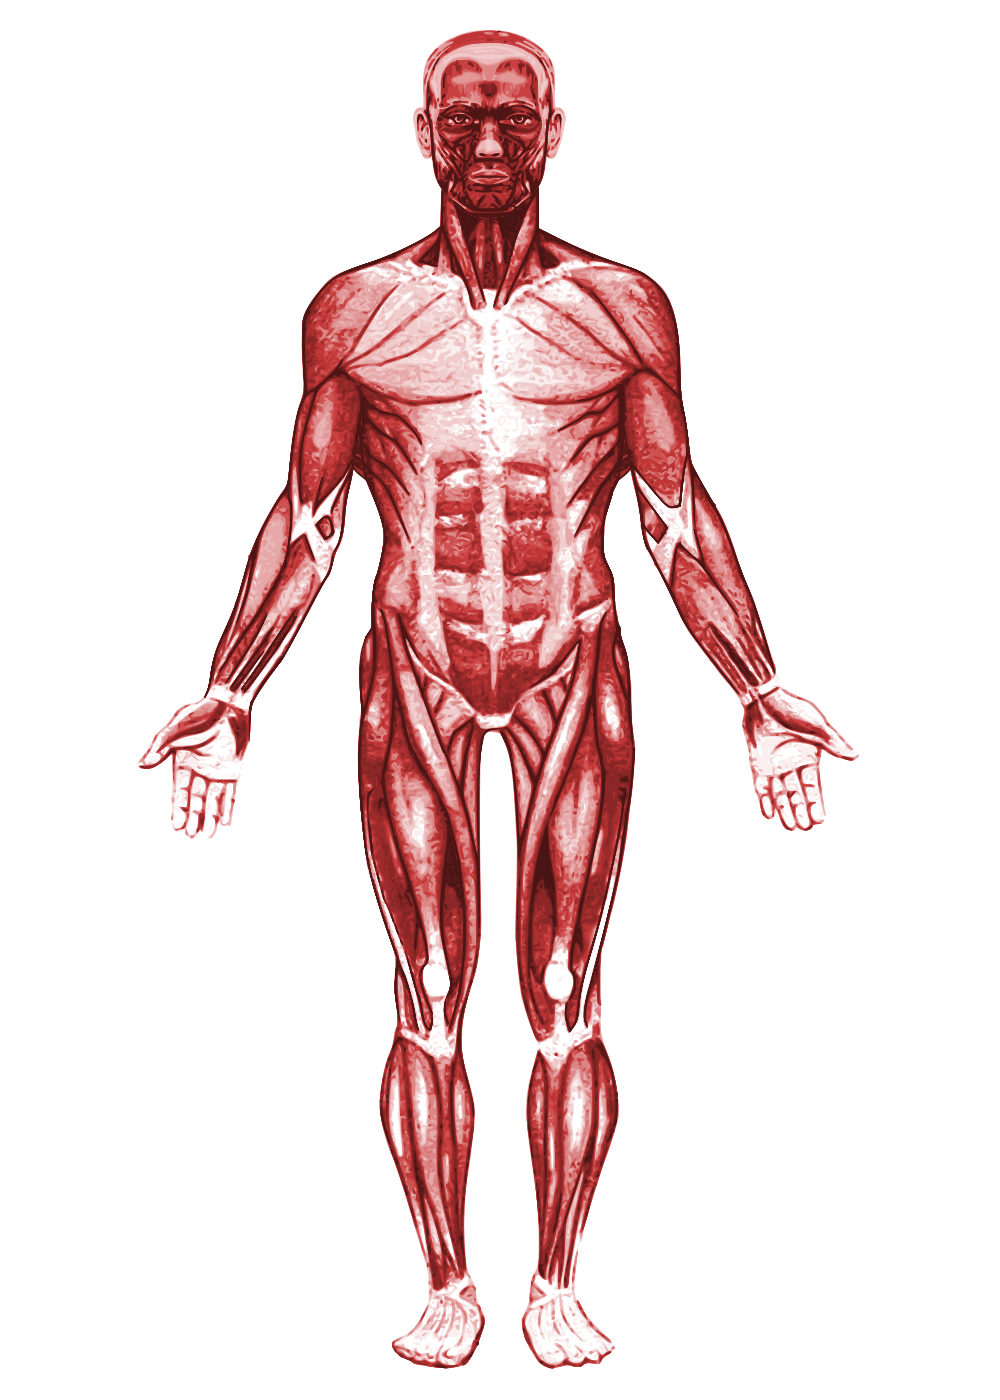 10: Muscular System